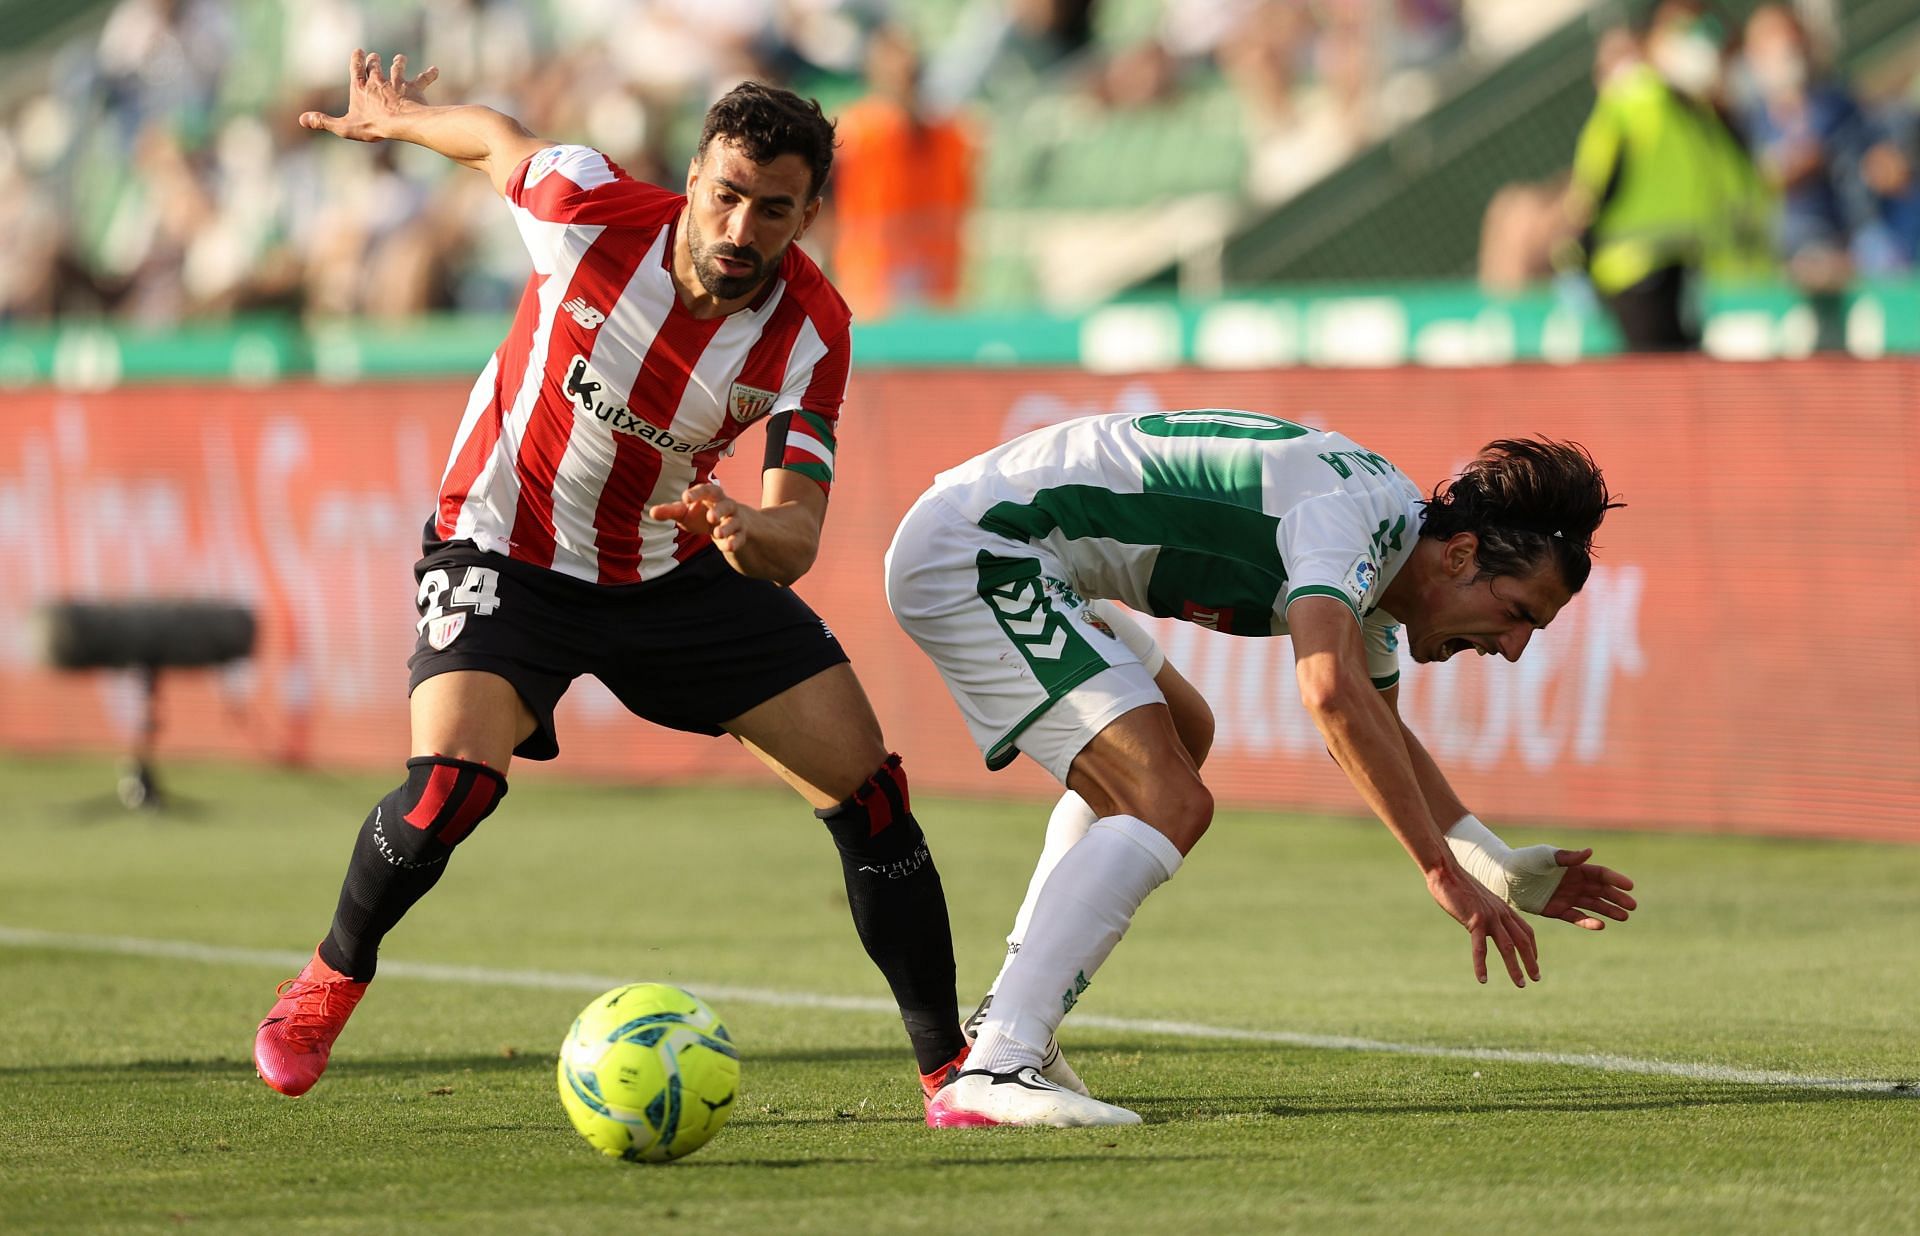 Elche take on Athletic Bilbao this weekend